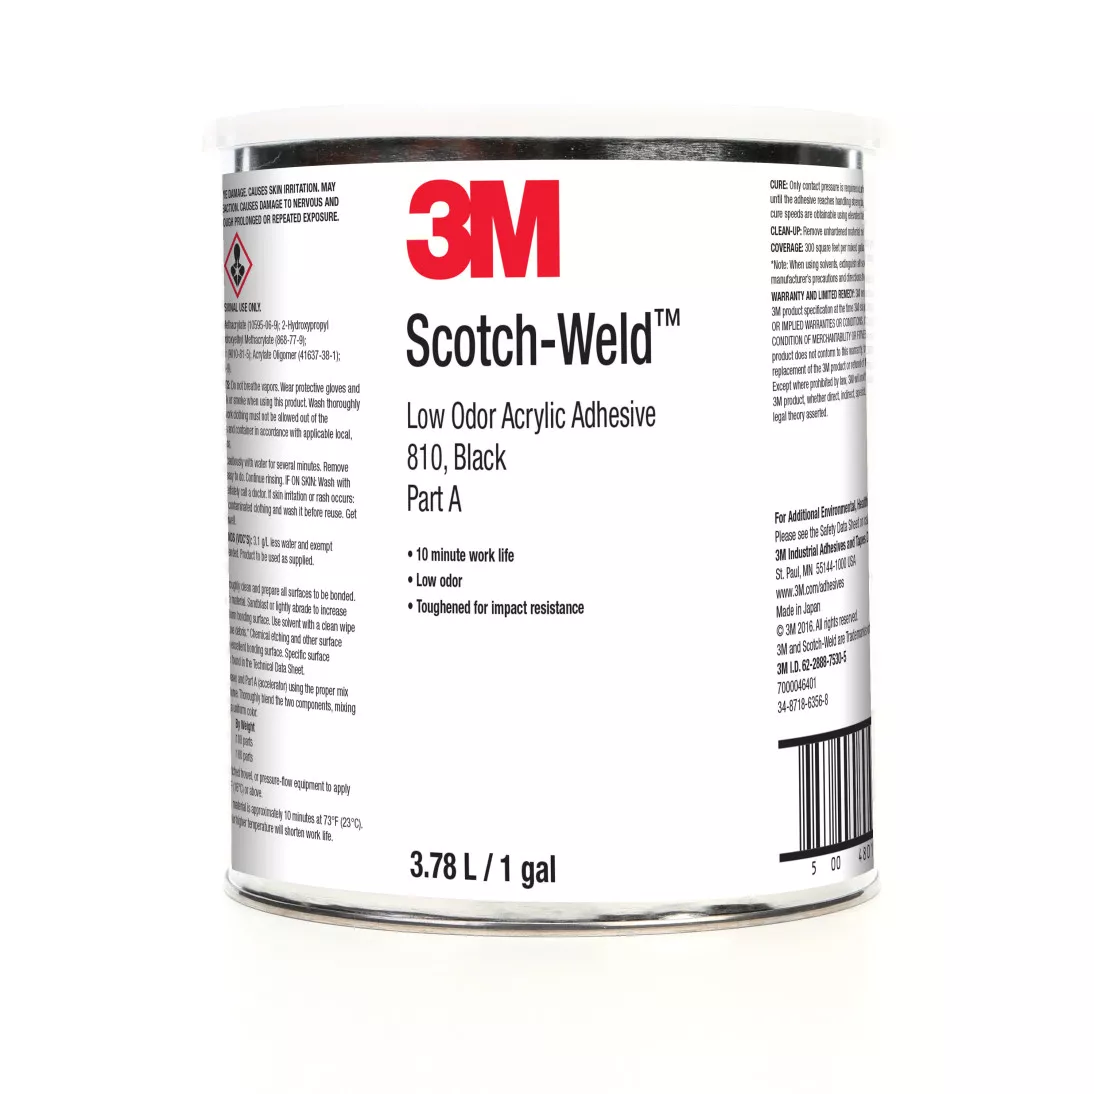 3M™ Scotch-Weld™ Low Odor Acrylic Adhesive 810, Black, Part A, 1 Gallon
Can, 4/case